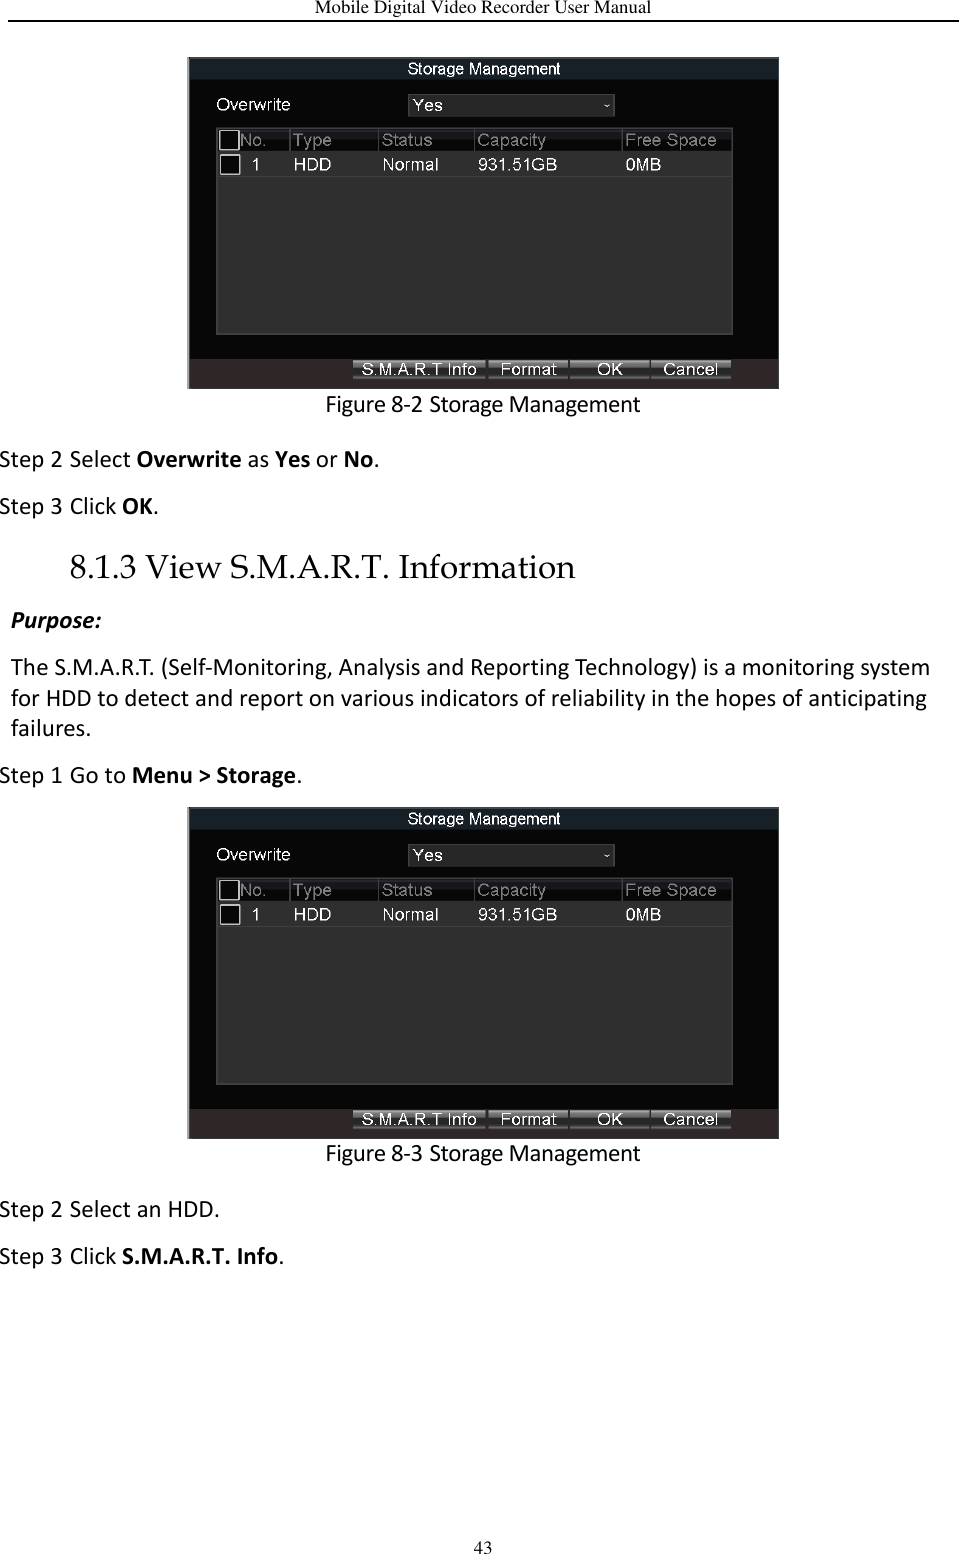 Mobile Digital Video Recorder User Manual 43  Figure 8-2 Storage Management Step 2 Select Overwrite as Yes or No. Step 3 Click OK. 8.1.3 View S.M.A.R.T. Information Purpose: The S.M.A.R.T. (Self-Monitoring, Analysis and Reporting Technology) is a monitoring system for HDD to detect and report on various indicators of reliability in the hopes of anticipating failures. Step 1 Go to Menu &gt; Storage.  Figure 8-3 Storage Management Step 2 Select an HDD. Step 3 Click S.M.A.R.T. Info. 